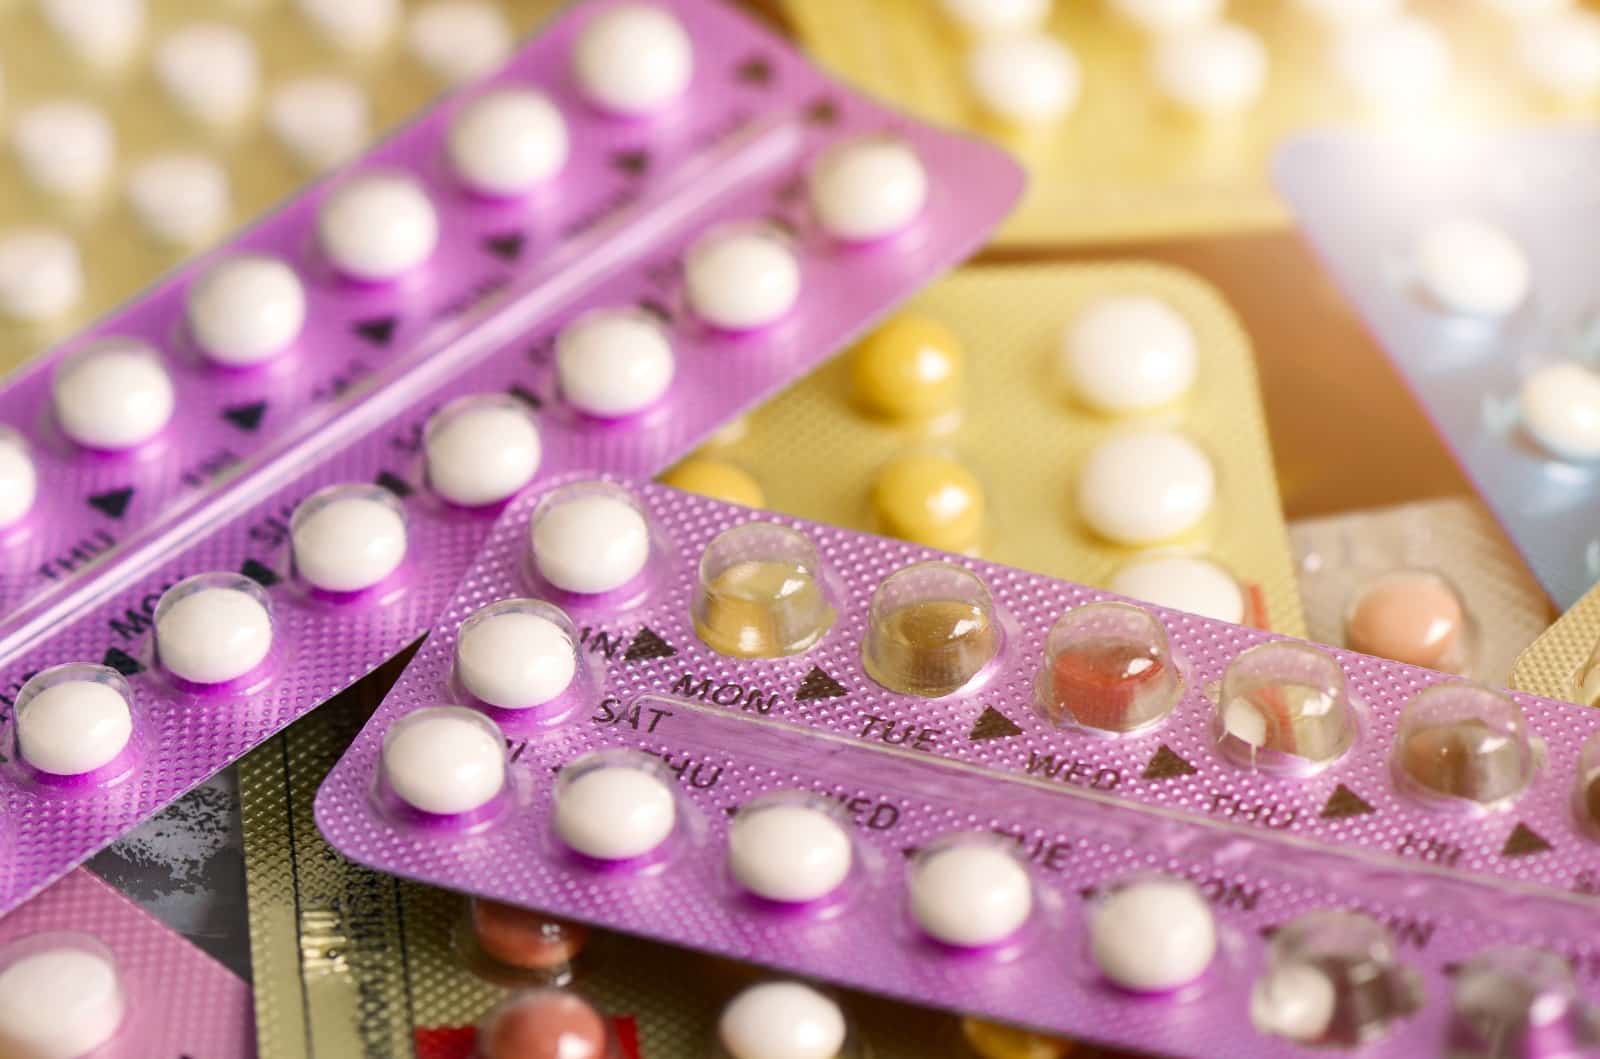 Finding the right birth control for women with diabetes